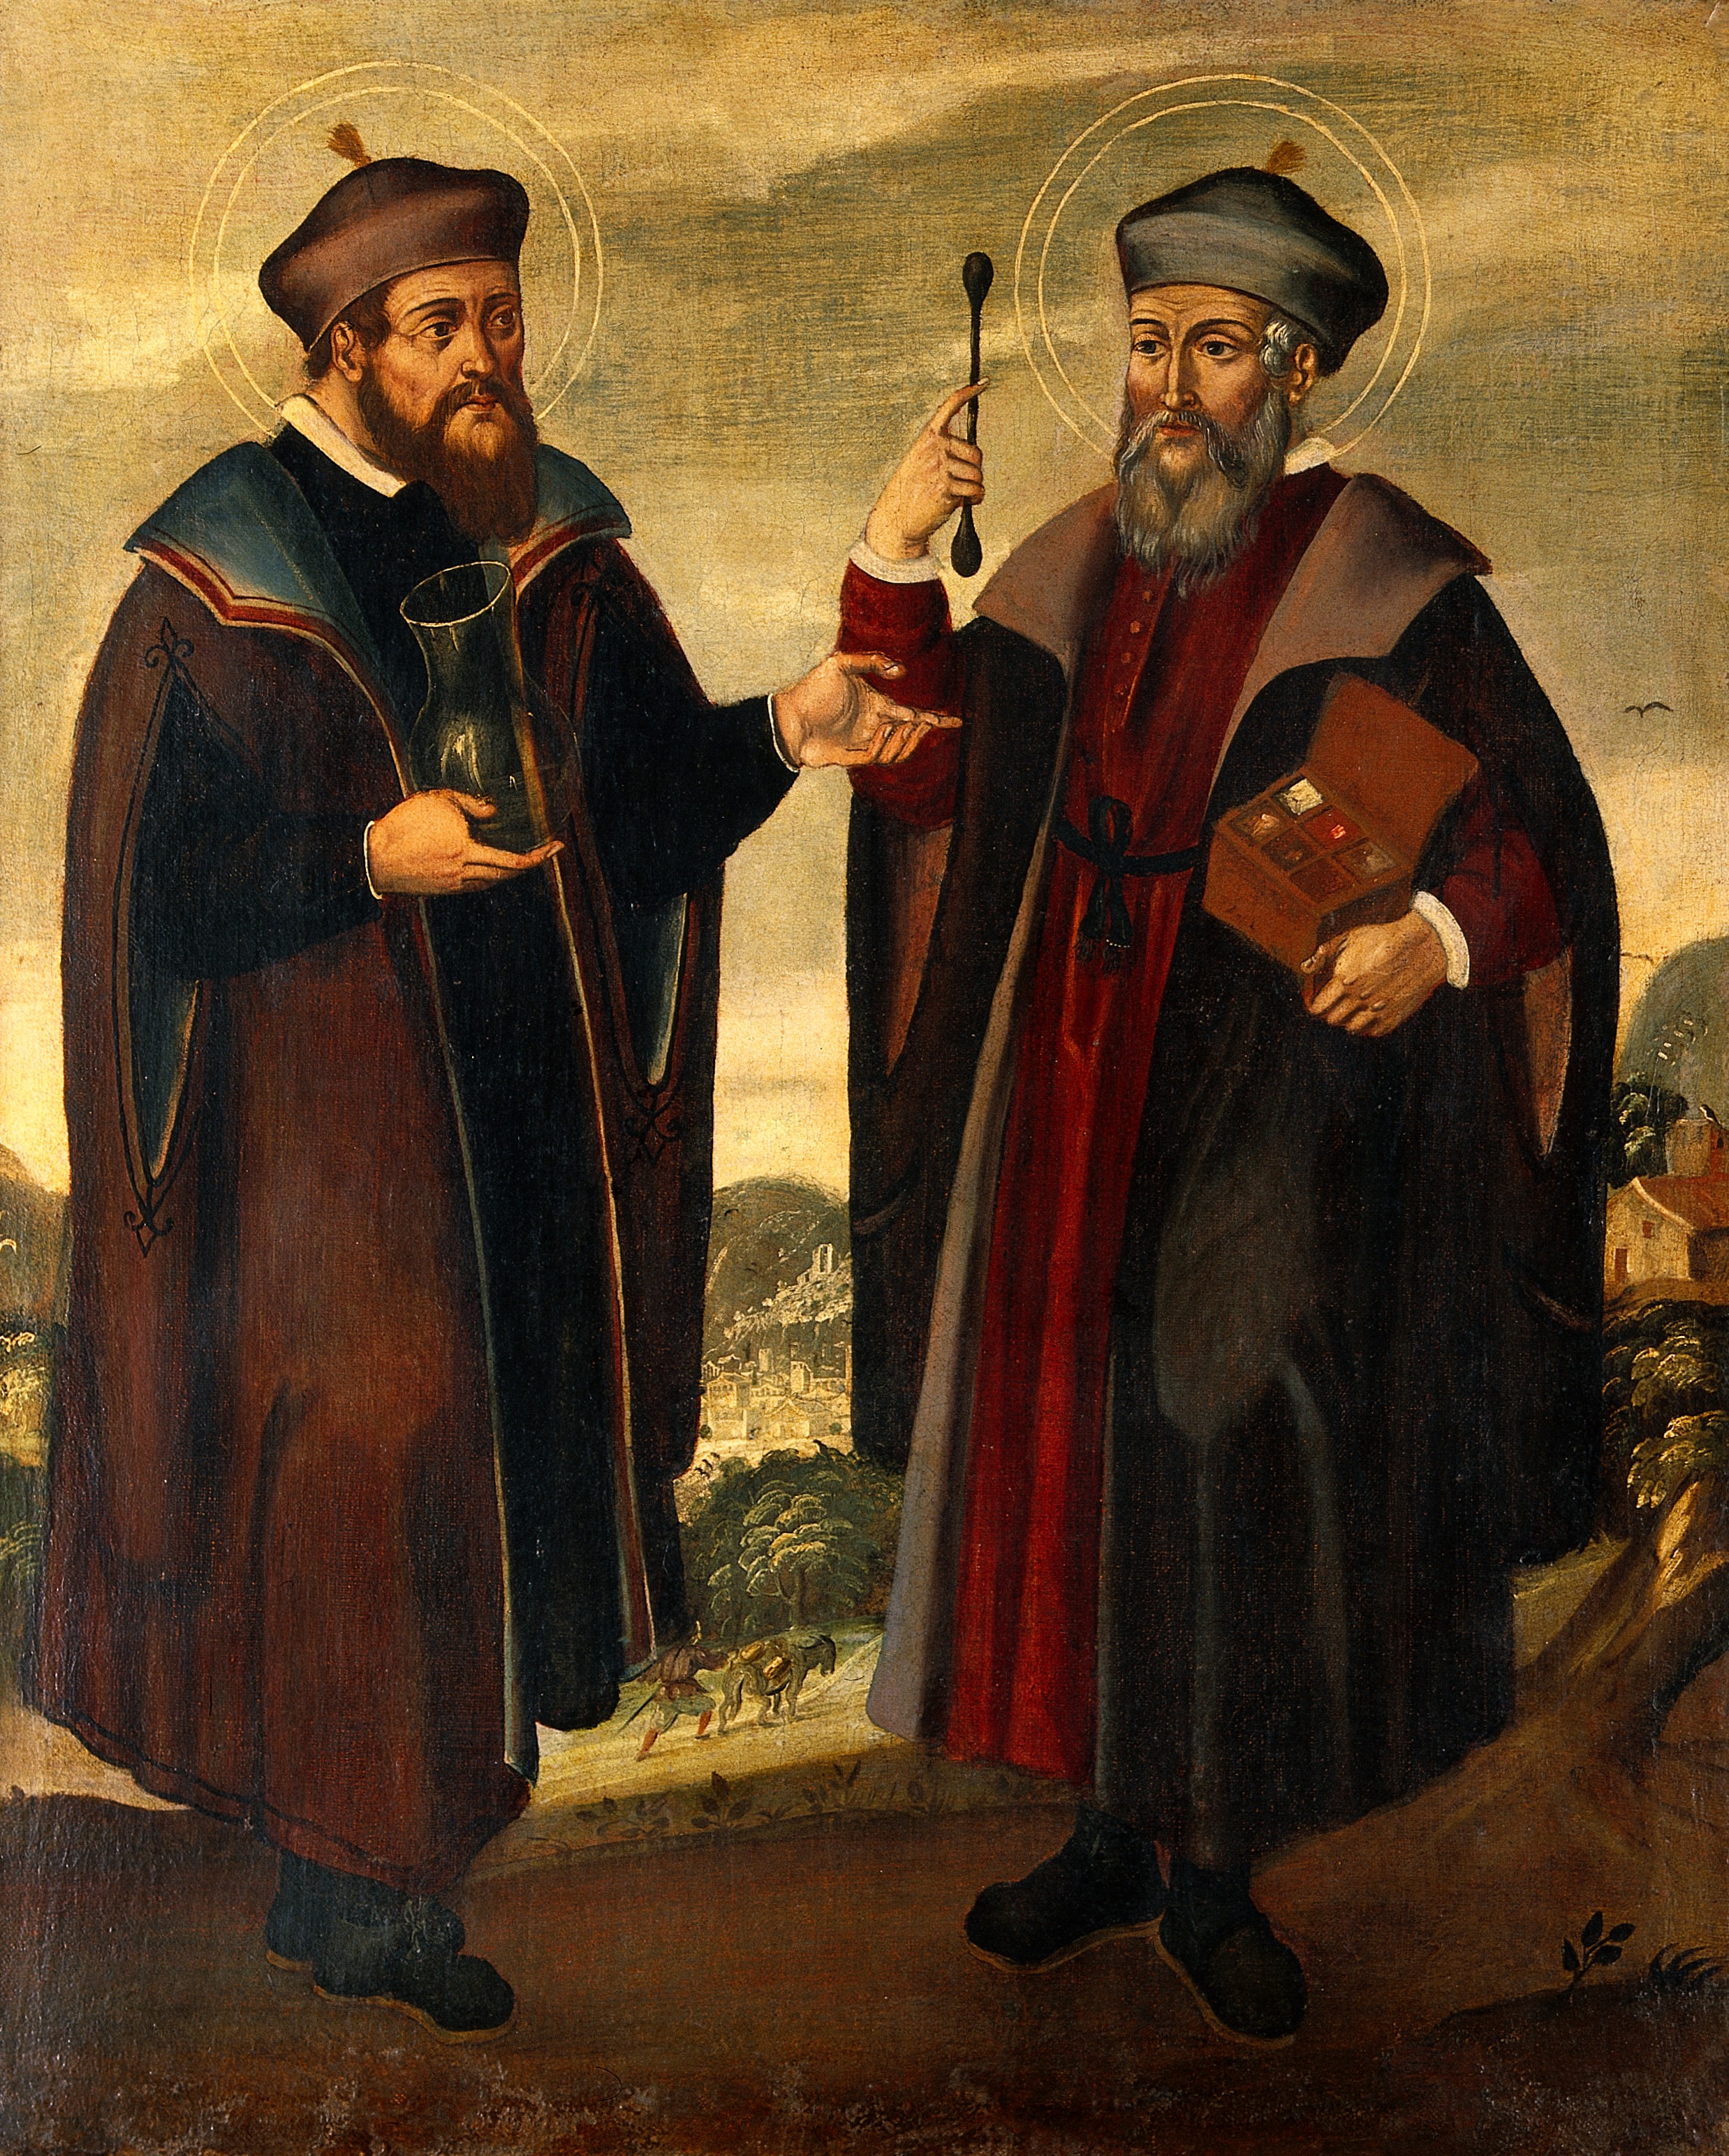 SS. Cosmas and Damian in a landscape. Oil painting, 17th c. Wellcome V0017401